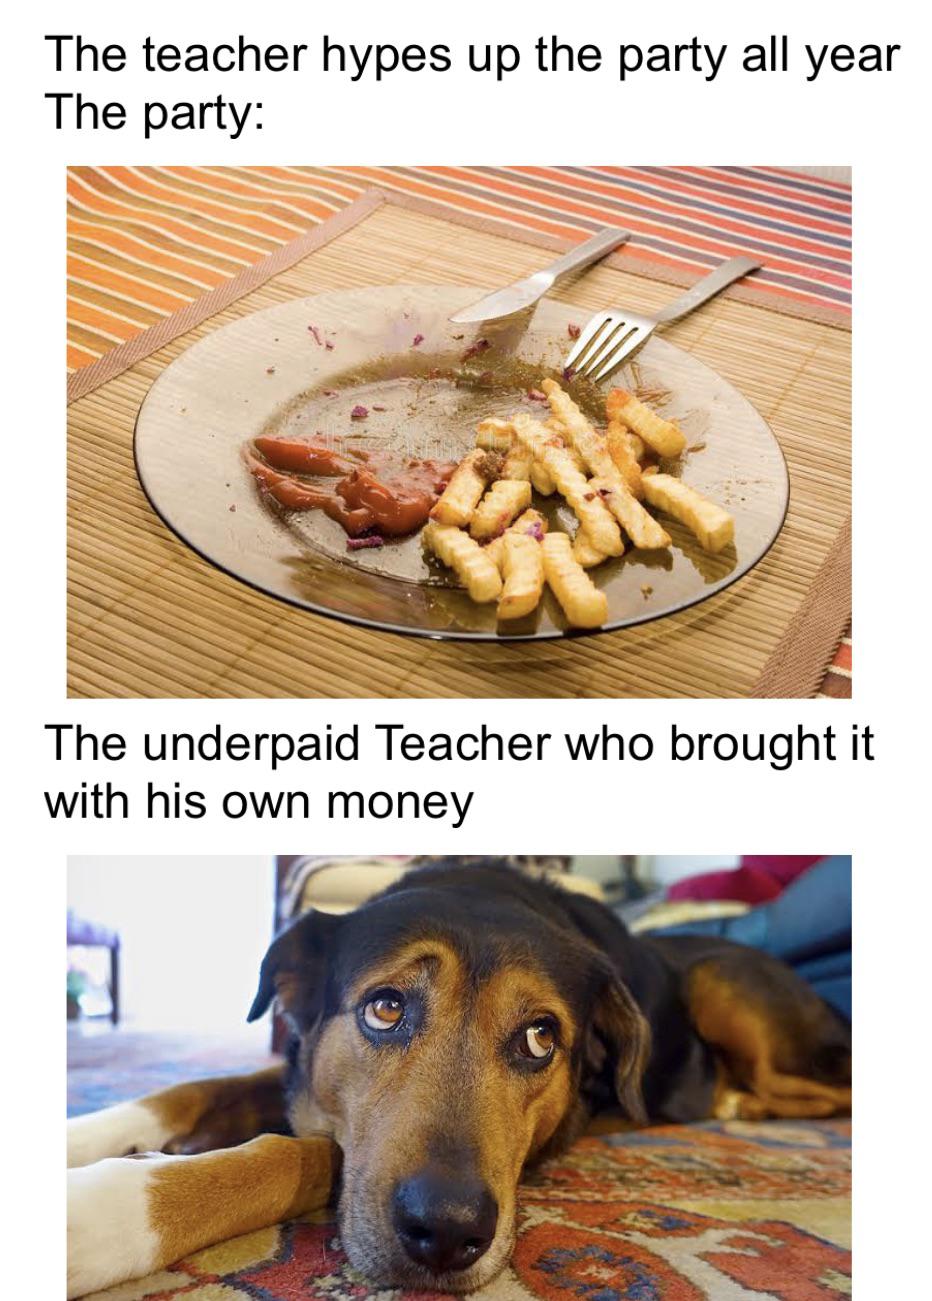 dank memes - funny memes - dog at home - The teacher hypes up the party all year The party The underpaid Teacher who brought it with his own money